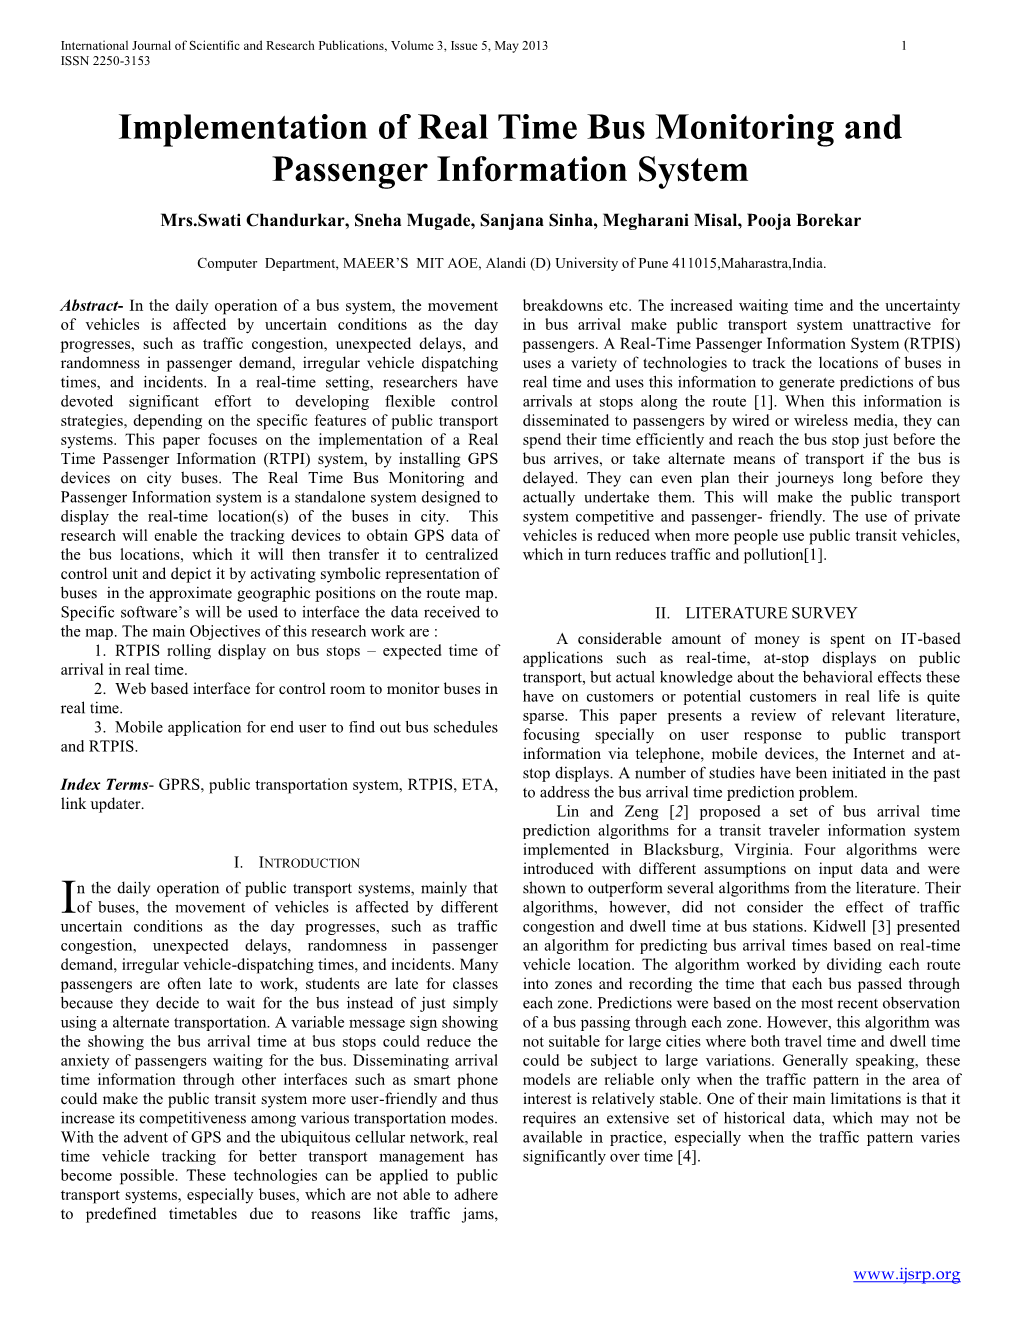 Implementation of Real Time Bus Monitoring and Passenger Information System